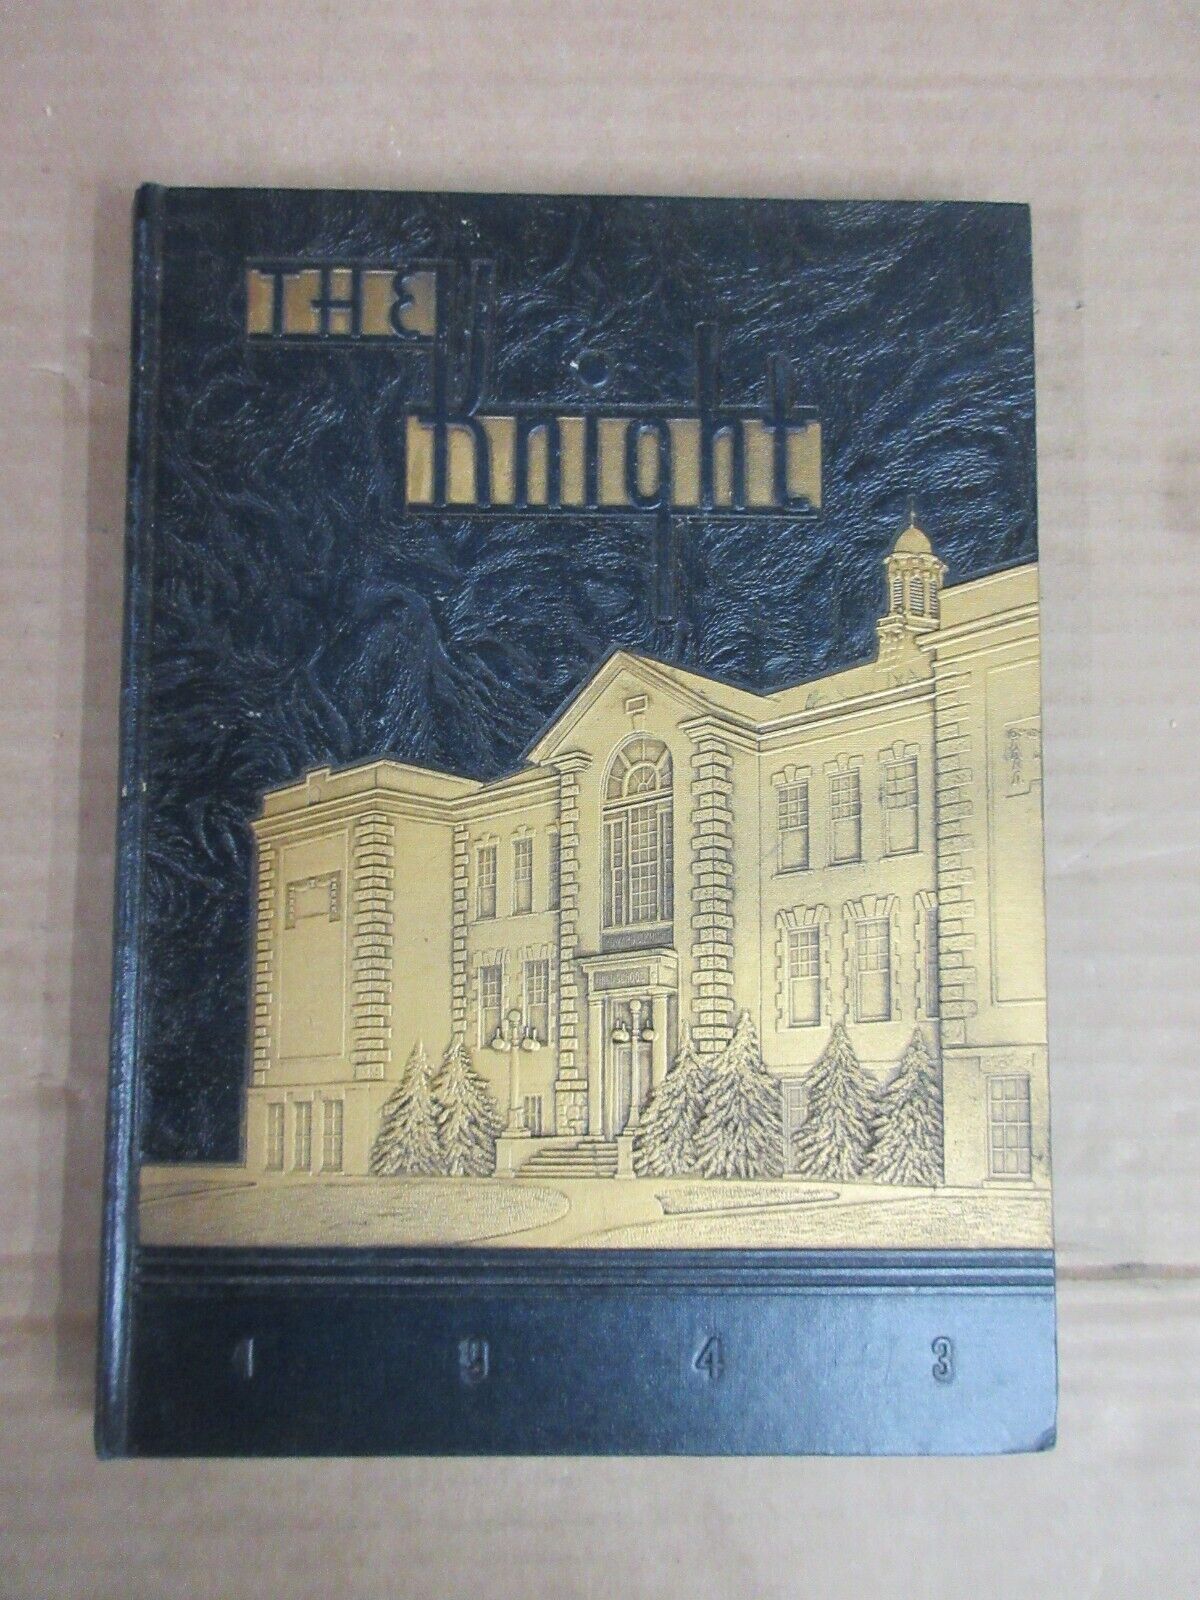 Vintage The Knight 1943 Yearbook Collingswood High School Collingswood NJ  